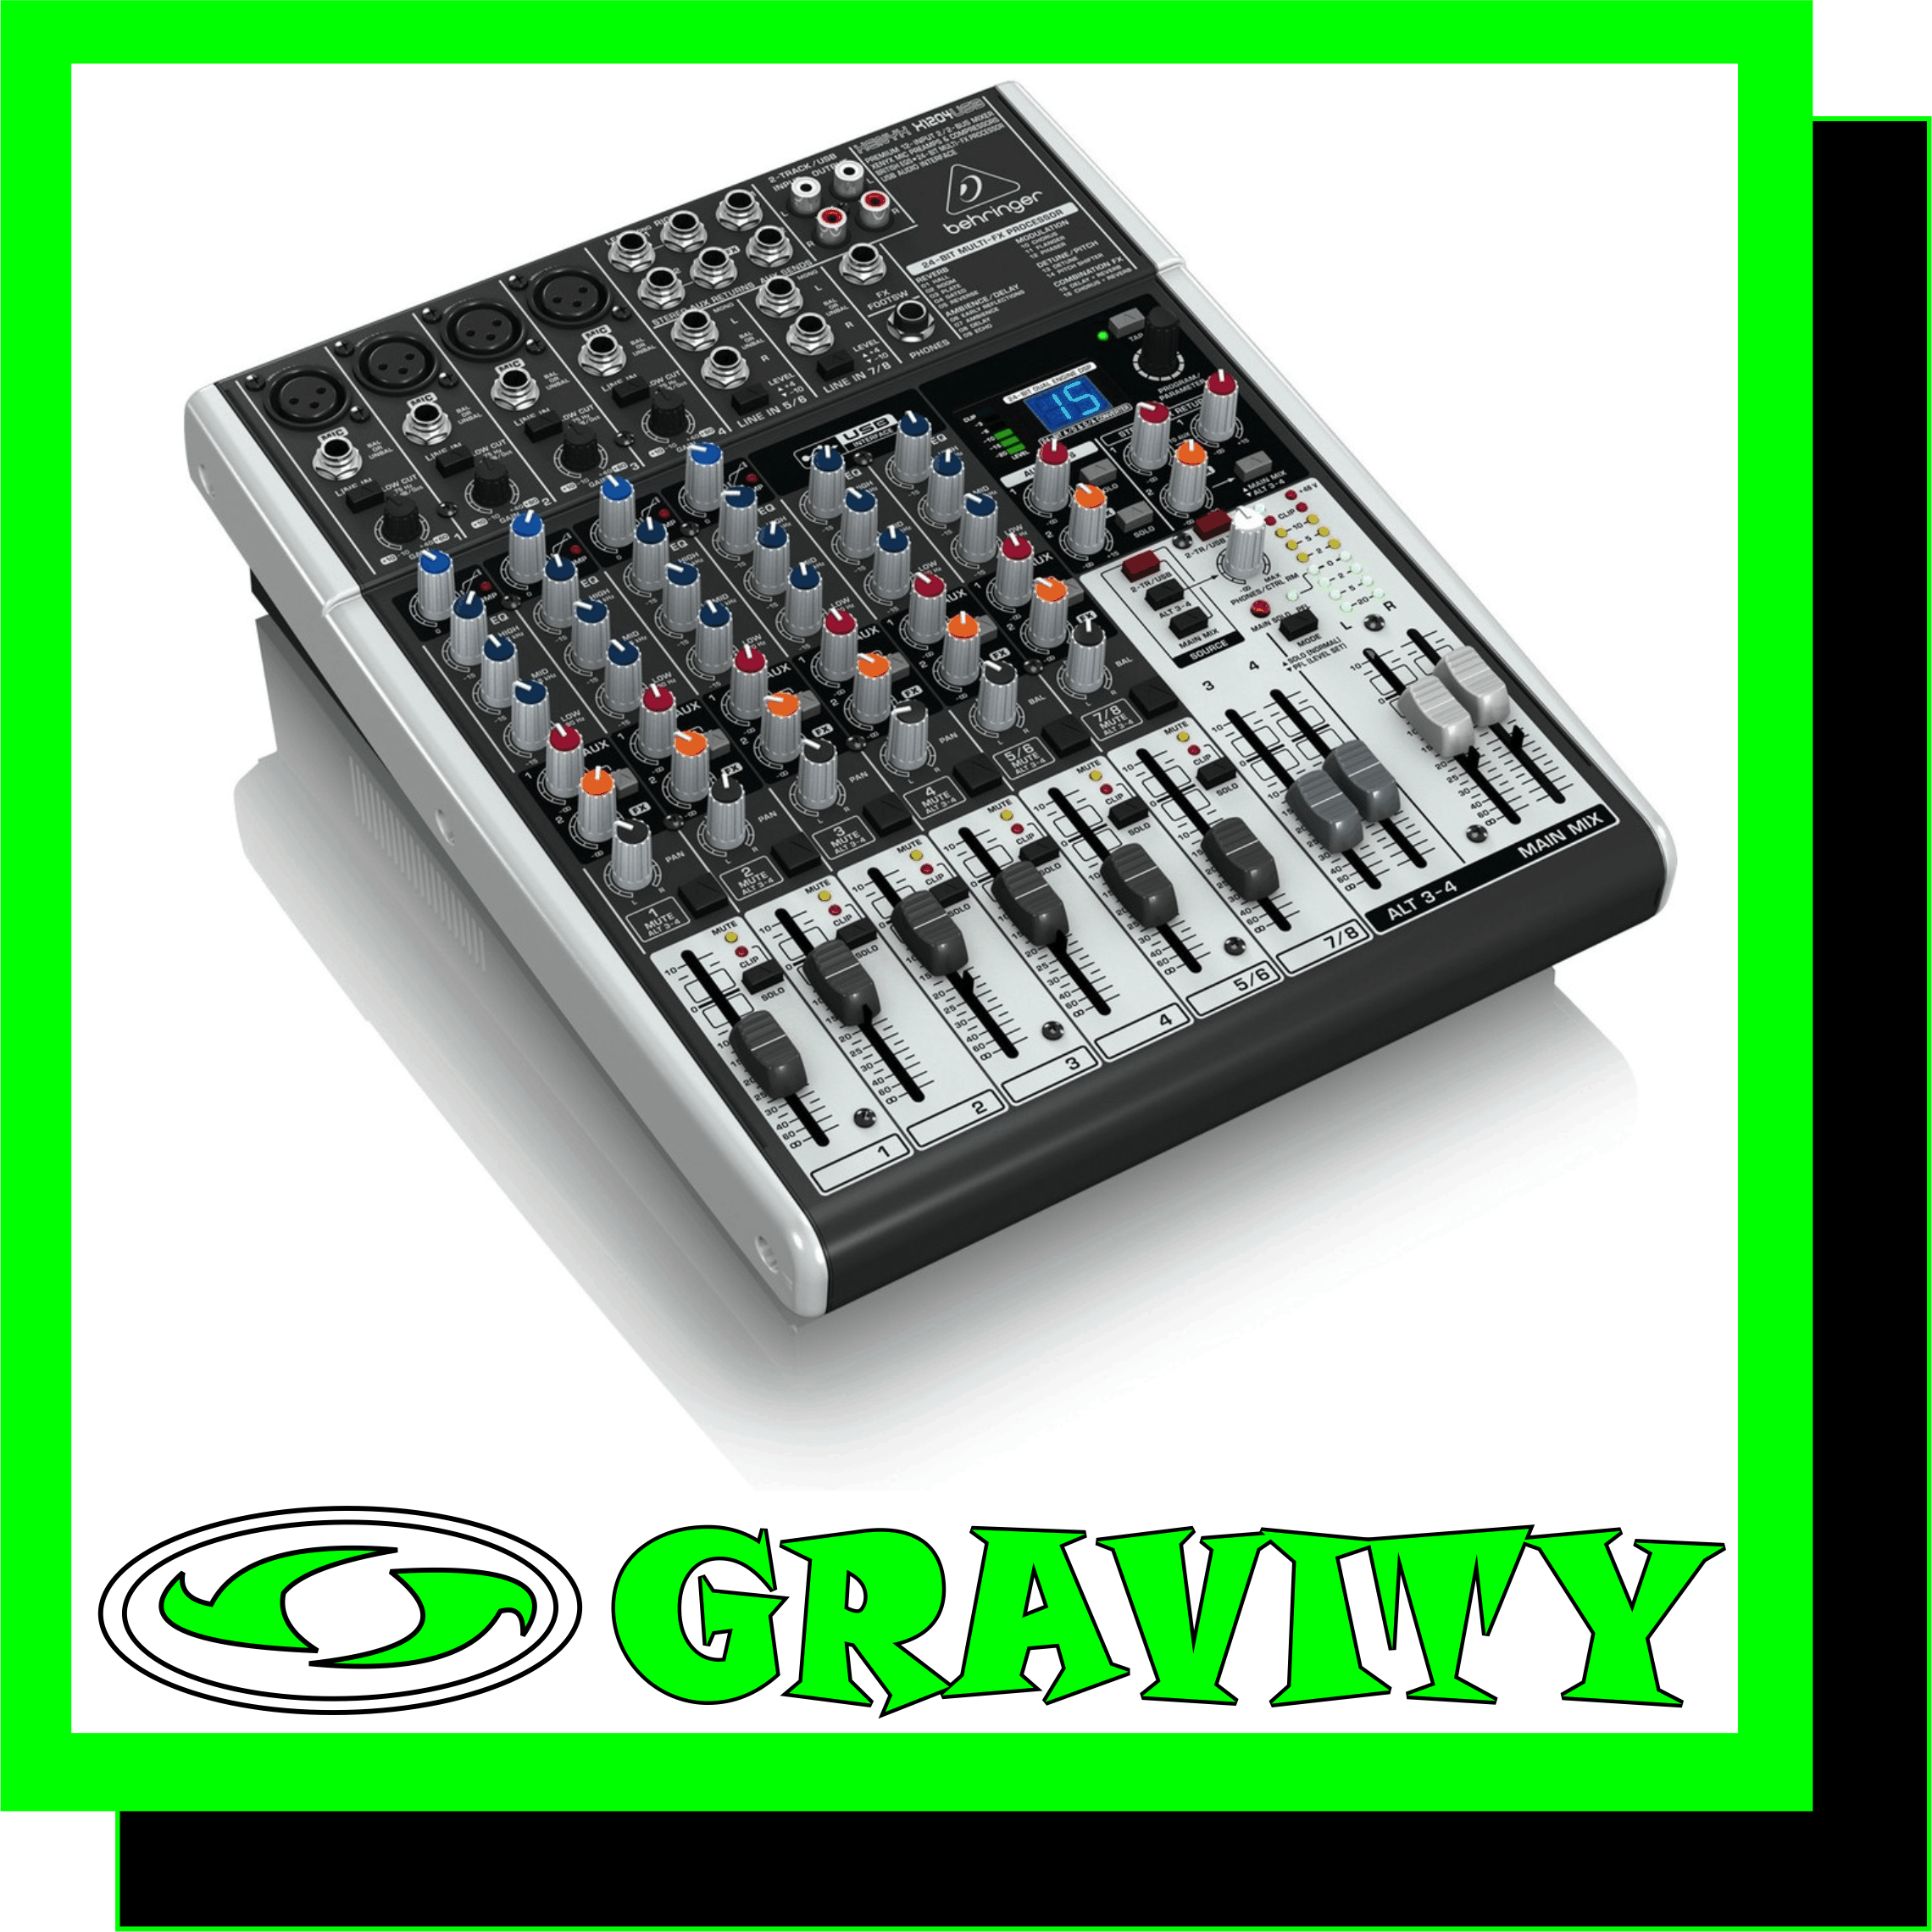 Behringer XENYX X1204USB 12-Input 2/2-Bus Mixer   Product Features: -Premium ultra-low noise, high headroom mixer -4 state-of-the-art, phantom-powered XENYX Mic Preamps comparable to stand-alone boutique preamps -4 studio-grade compressors with super-easy “one-knob” functionality and control LED for professional vocal and instrumental sound -Ultra-high quality KLARK TEKNIK FX processor with LCD display, dual-parameters, Tap function and storable user parameter settings -“Wireless-ready” for high-quality BEHRINGER digital wireless system (not included) -Built-in stereo USB/Audio Interface to connect directly to your computer. Free audio recording, editing and podcasting software plus 150 instrument/effect plug-ins     downloadable at behringer.com -Neo-classic “British” 3-band EQs for warm and musical sound -2 aux sends per channel: 1 pre/post fader switchable for monitoring/FX applications, 1 post fader (for internal FX or as external send) -Clip LEDs, mute/alt 3-4, solo and PFL functions on all channels -2 subgroups with separate outputs for added routing flexibility -2 multi-functional stereo aux returns with flexible routing -Balanced main mix outputs with gold-plated XLR connectors plus separate control room, headphones and 2-track outputs -Control room/phones outputs with multi-input source matrix -Long-wearing 60-mm logarithmic-taper faders and sealed rotary controls -“Planet Earth” switching power supply for maximum flexibility (100 – 240 V~), noise-free audio, superior transient response plus low power consumption for energy saving -High-quality components and exceptionally rugged construction ensure long life Conceived and designed by BEHRINGER Germany  The compact X1204USB mixer allows you to effortlessly achieve premium-quality sound, thanks to 4 onboard studio-grade XENYX Mic Preamps and ultra-musical British channel EQs. And our easy-to-use one-knob compressors provide total dynamic control for the ultimate in punch and clarity, while respecting all the power and emotion you pack into every note. Add to this our 24-bit, dual engine Multi-FX processor with 16 editable, professional-grade presets including reverb, chorus, flanger, delay, pitch shifter and multi-effects and the X1204USB becomes an incredibly versatile mixer for your live performances. But the X1204USB wasnt just designed to handle your live gigs; it also provides the state-of-the-art tools you need to make stunning, professional-quality recordings. Along with a built-in USB/audio interface, the XENYX X1204USB comes with all the recording and editing software needed to turn your computer into a complete, high-performance home recording studio.